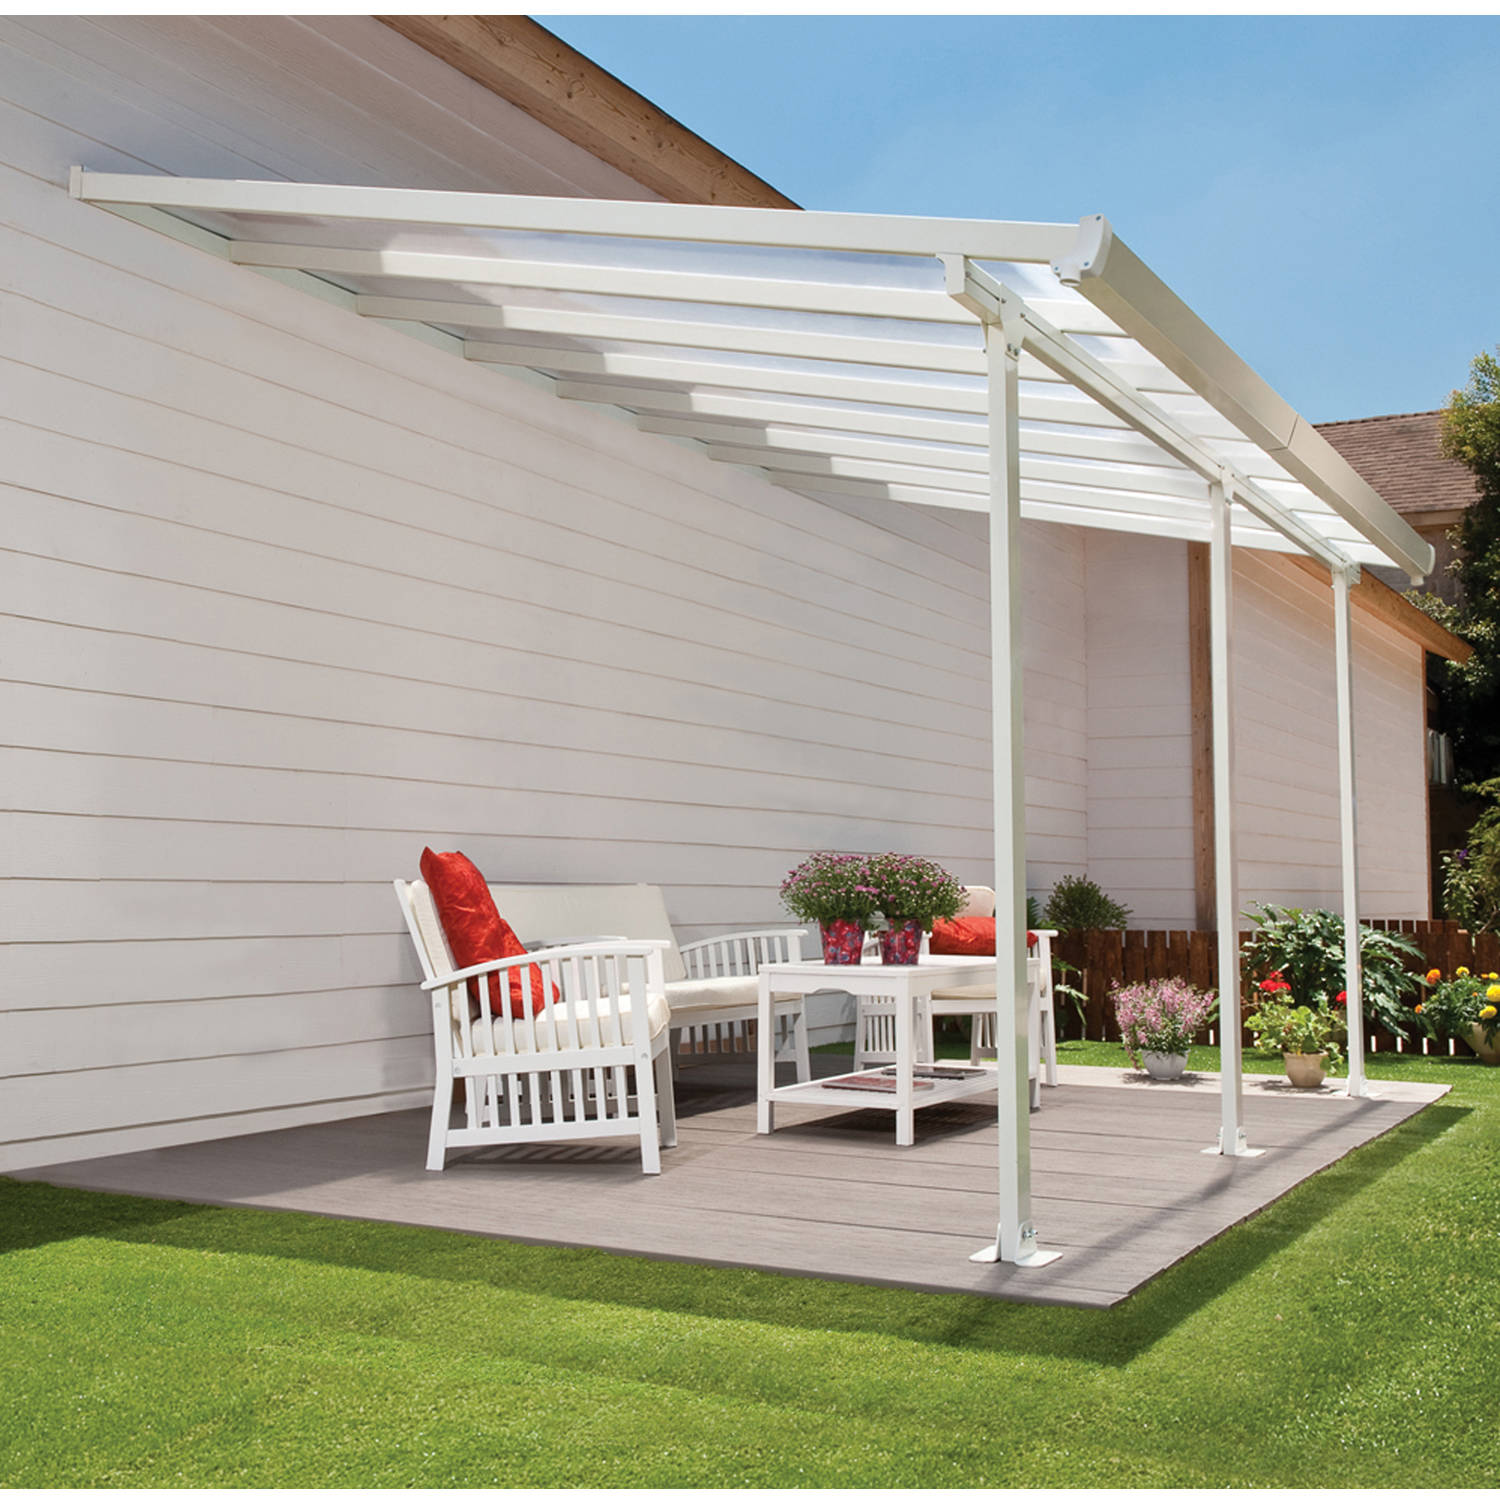 Palram - Canopia Feria 13' x 26' Polycarbonate/Galvanized Steel Patio Cover - White/Clear - image 2 of 9